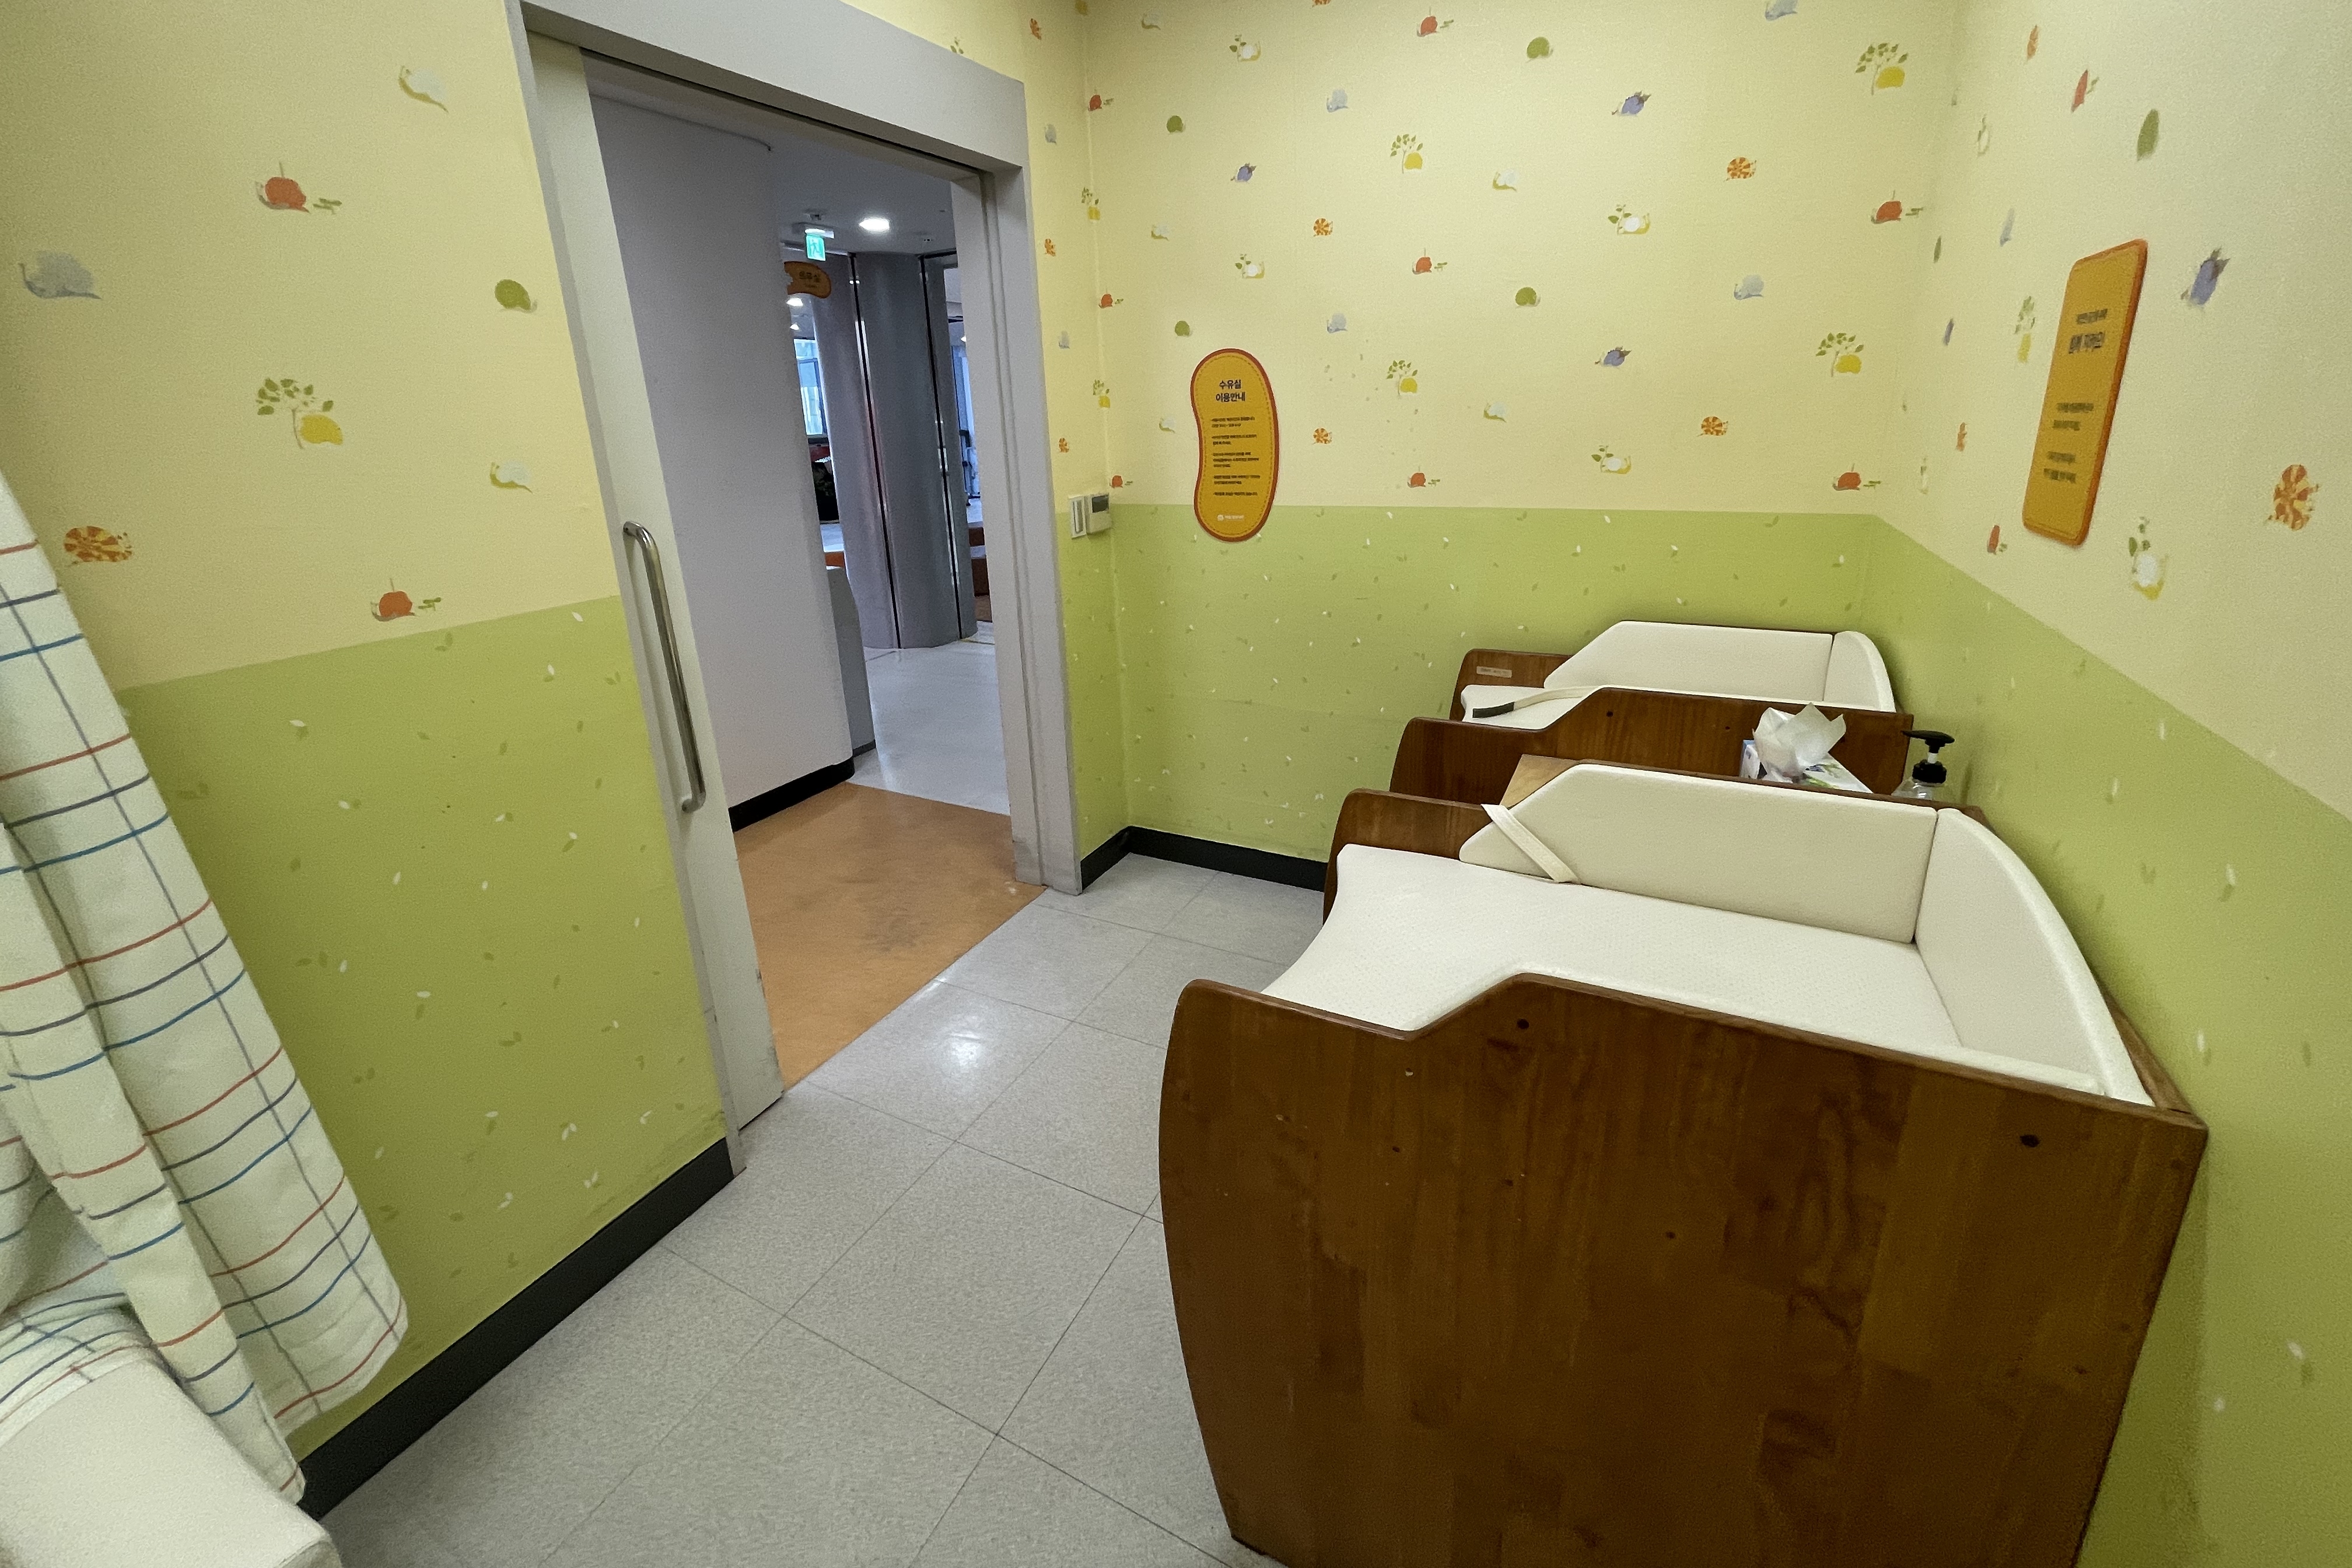 Lounge for families with babies 0 : Interior view of Seoul Children's Museum's nursing room